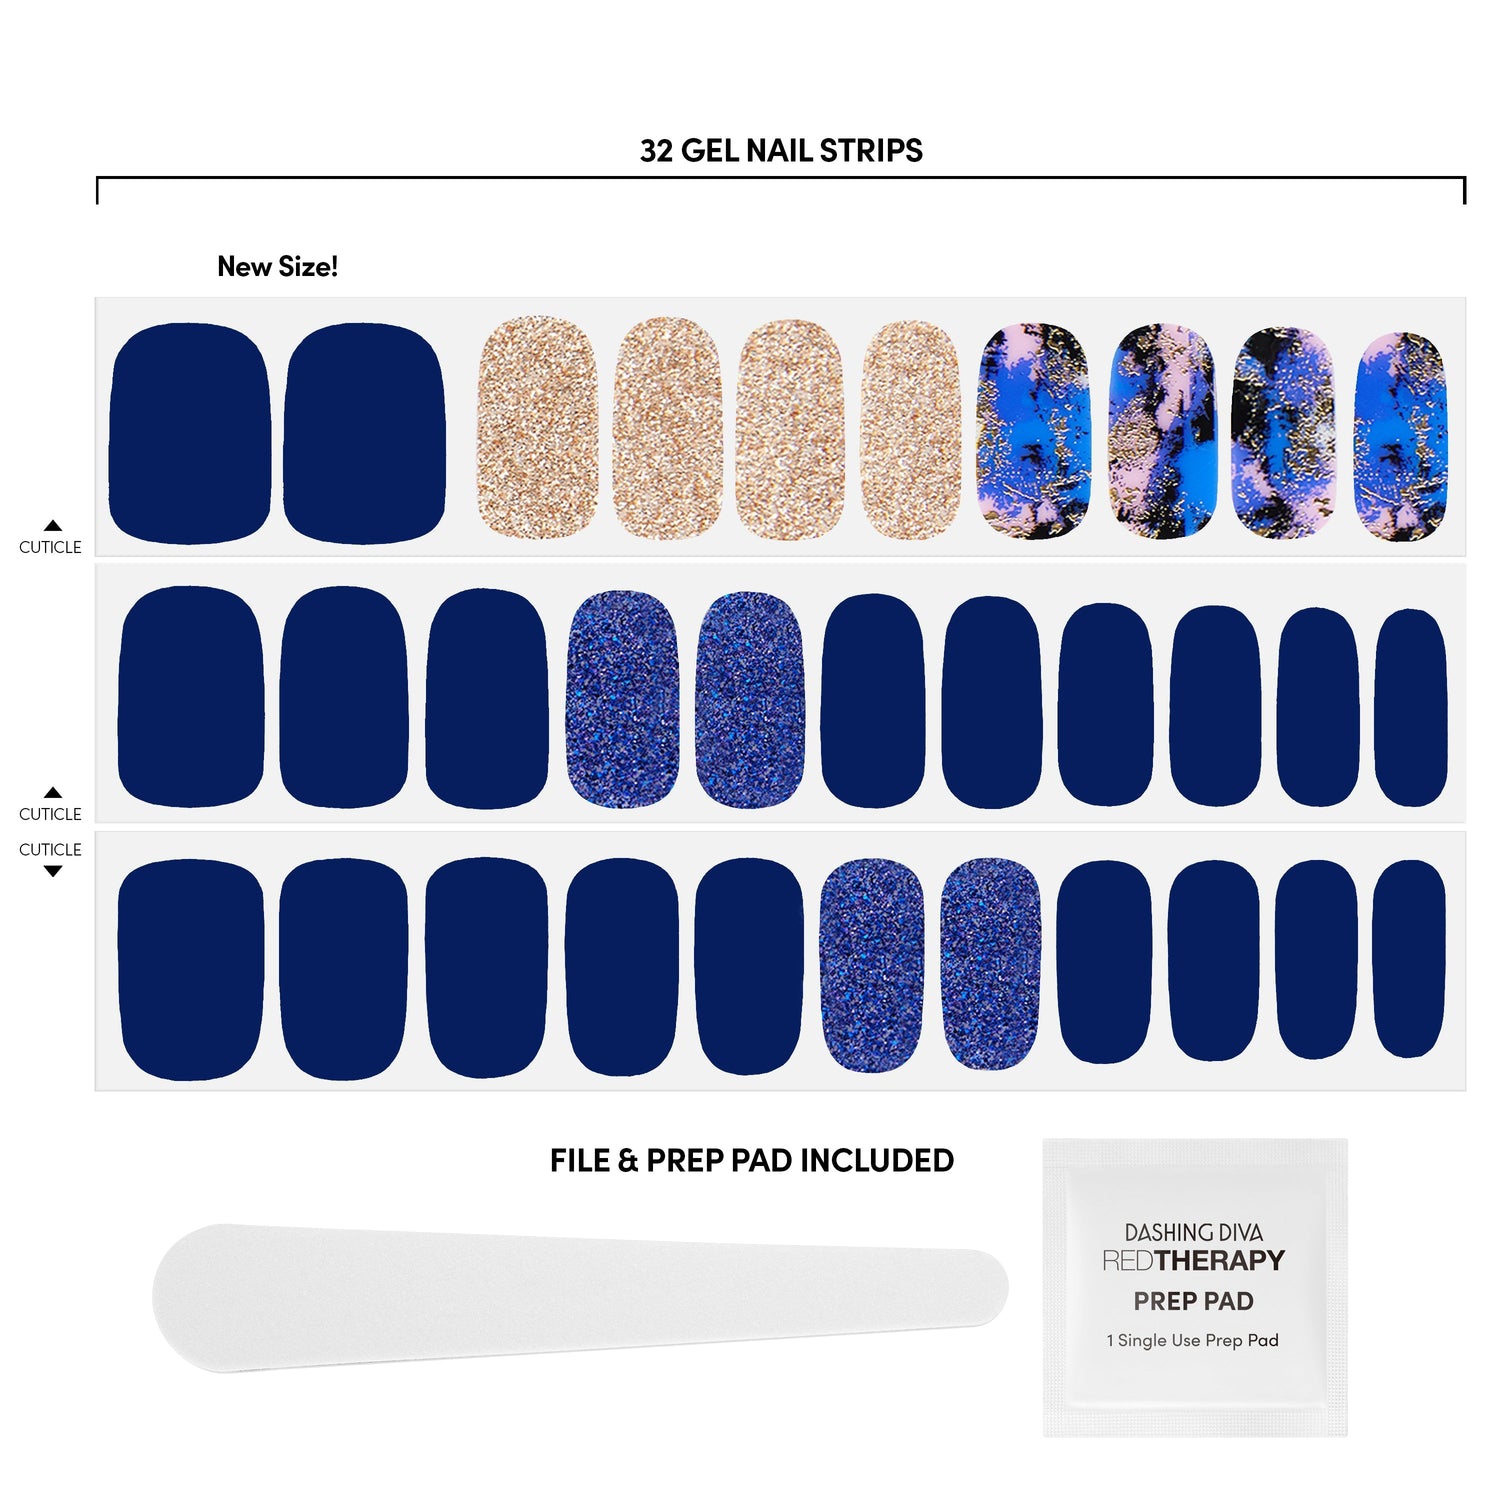 Navy blue gel nail strips, NAIL FILE, RED THERAPY PREP PAD